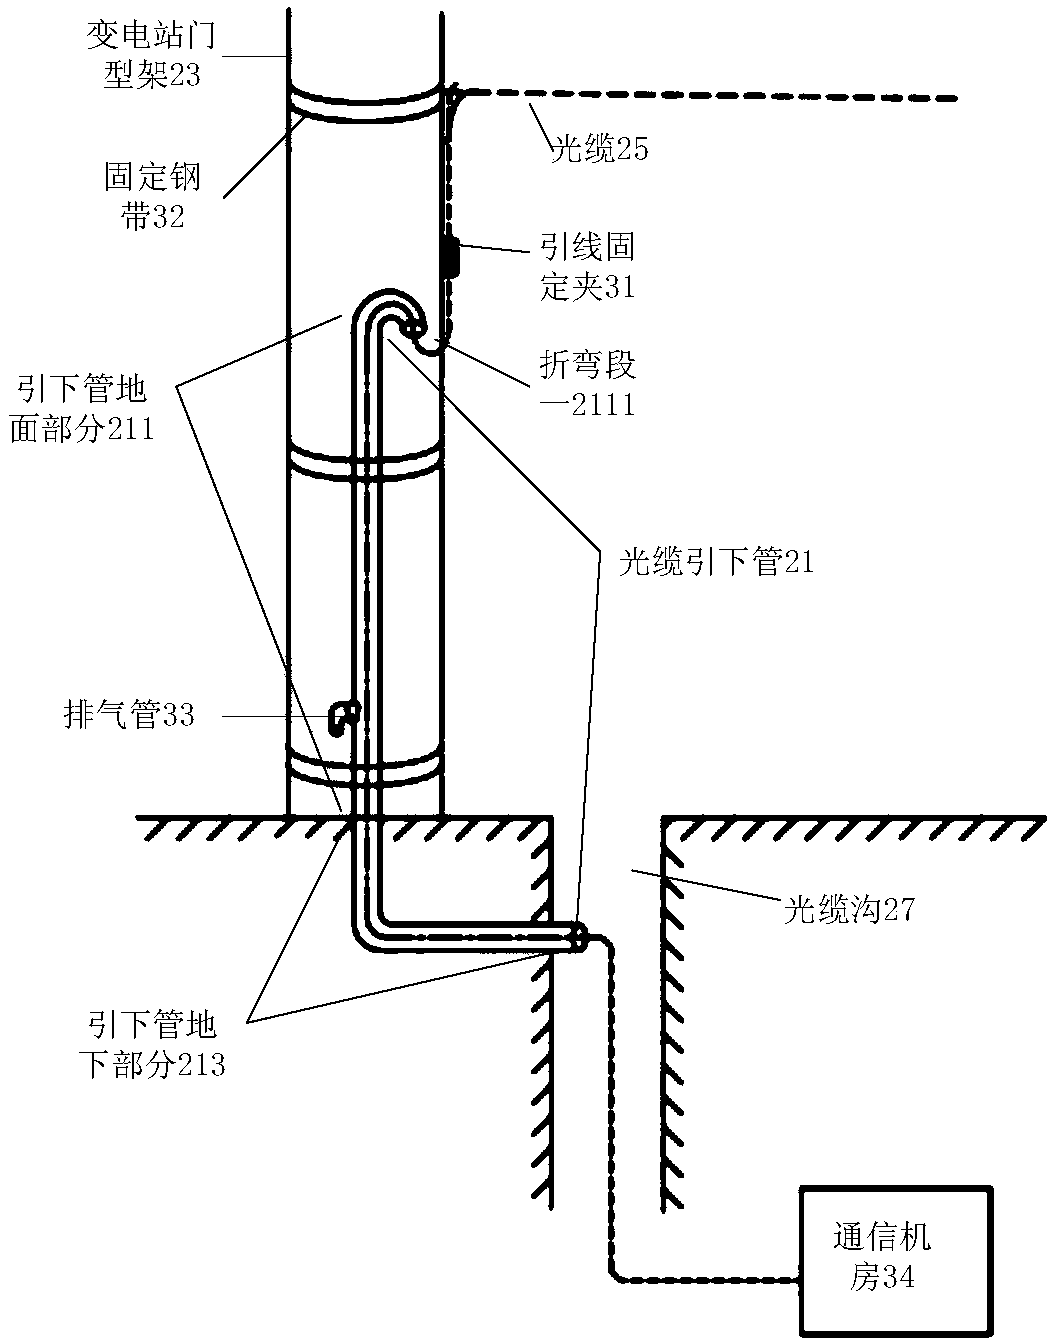 Optical cable lead-down pipe system